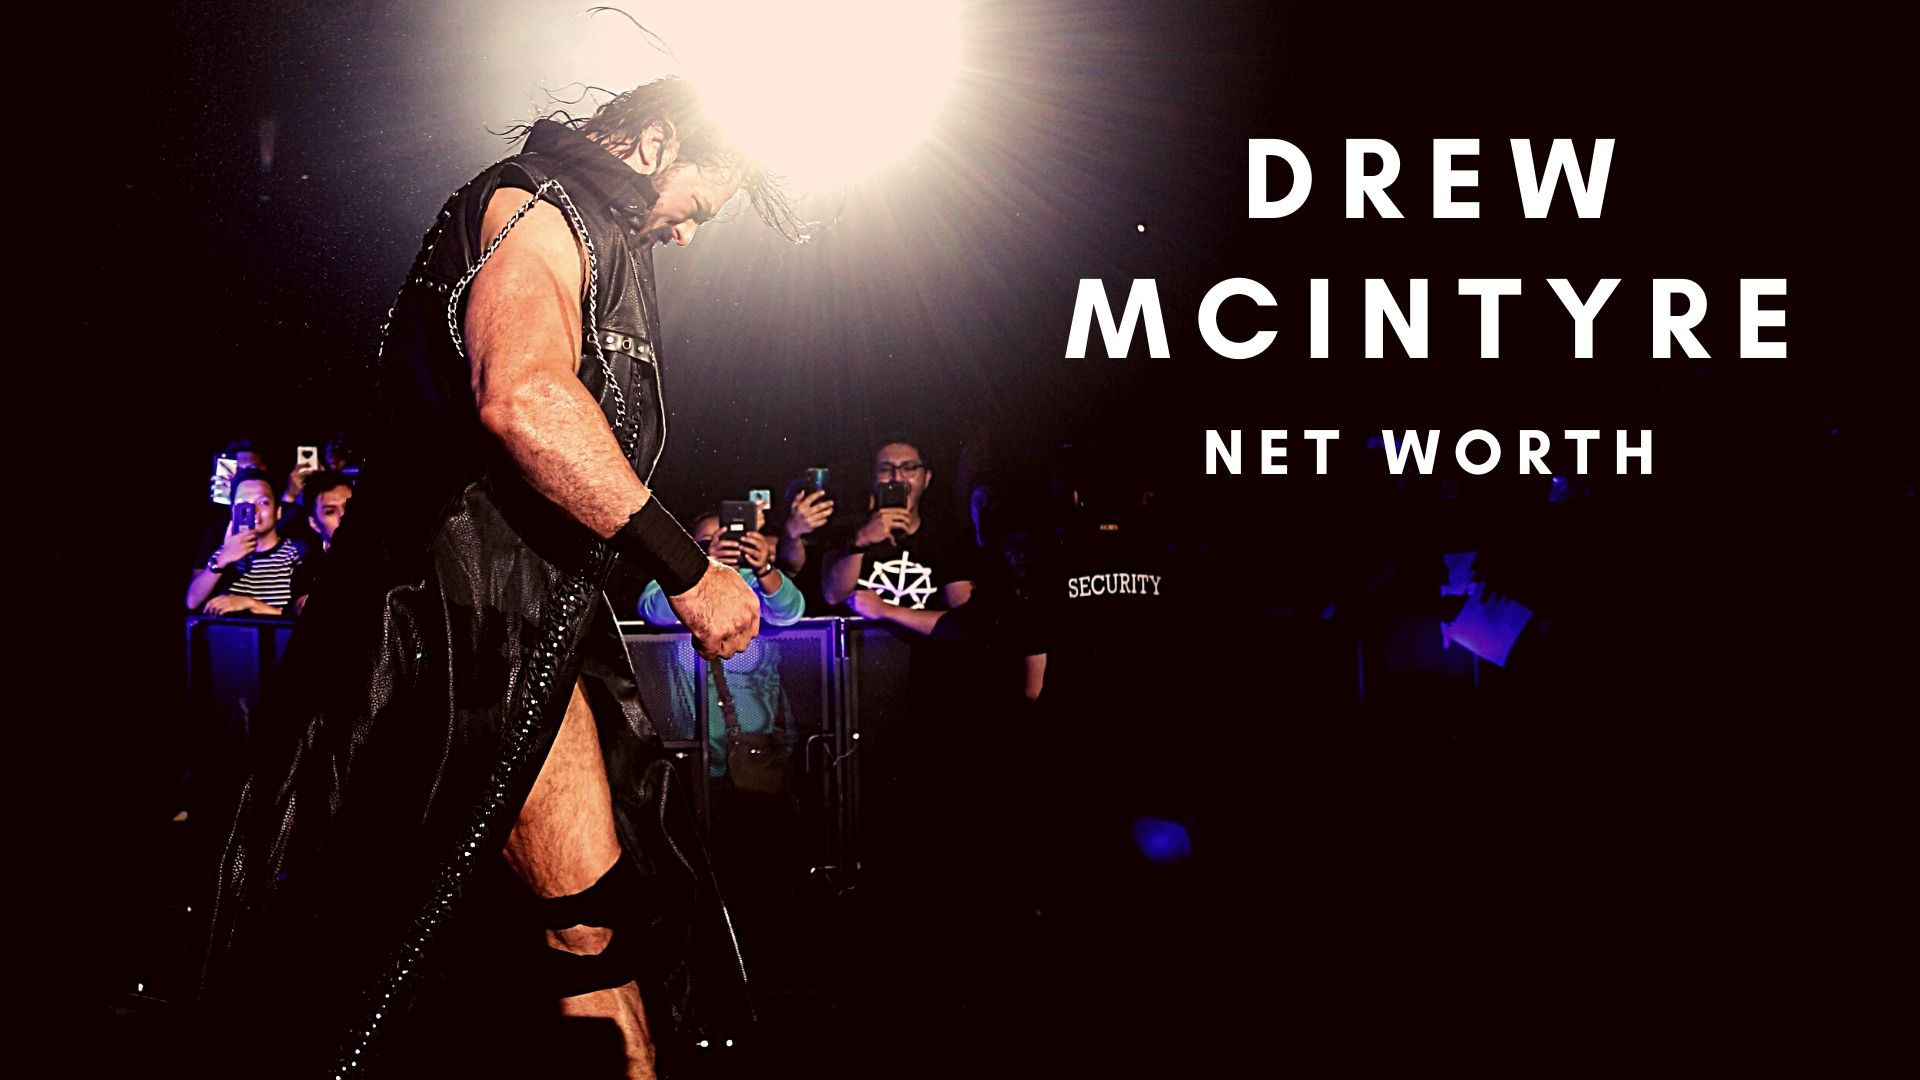 Drew McIntyre is one of the top stars in WWE and here is all about his net worth and more